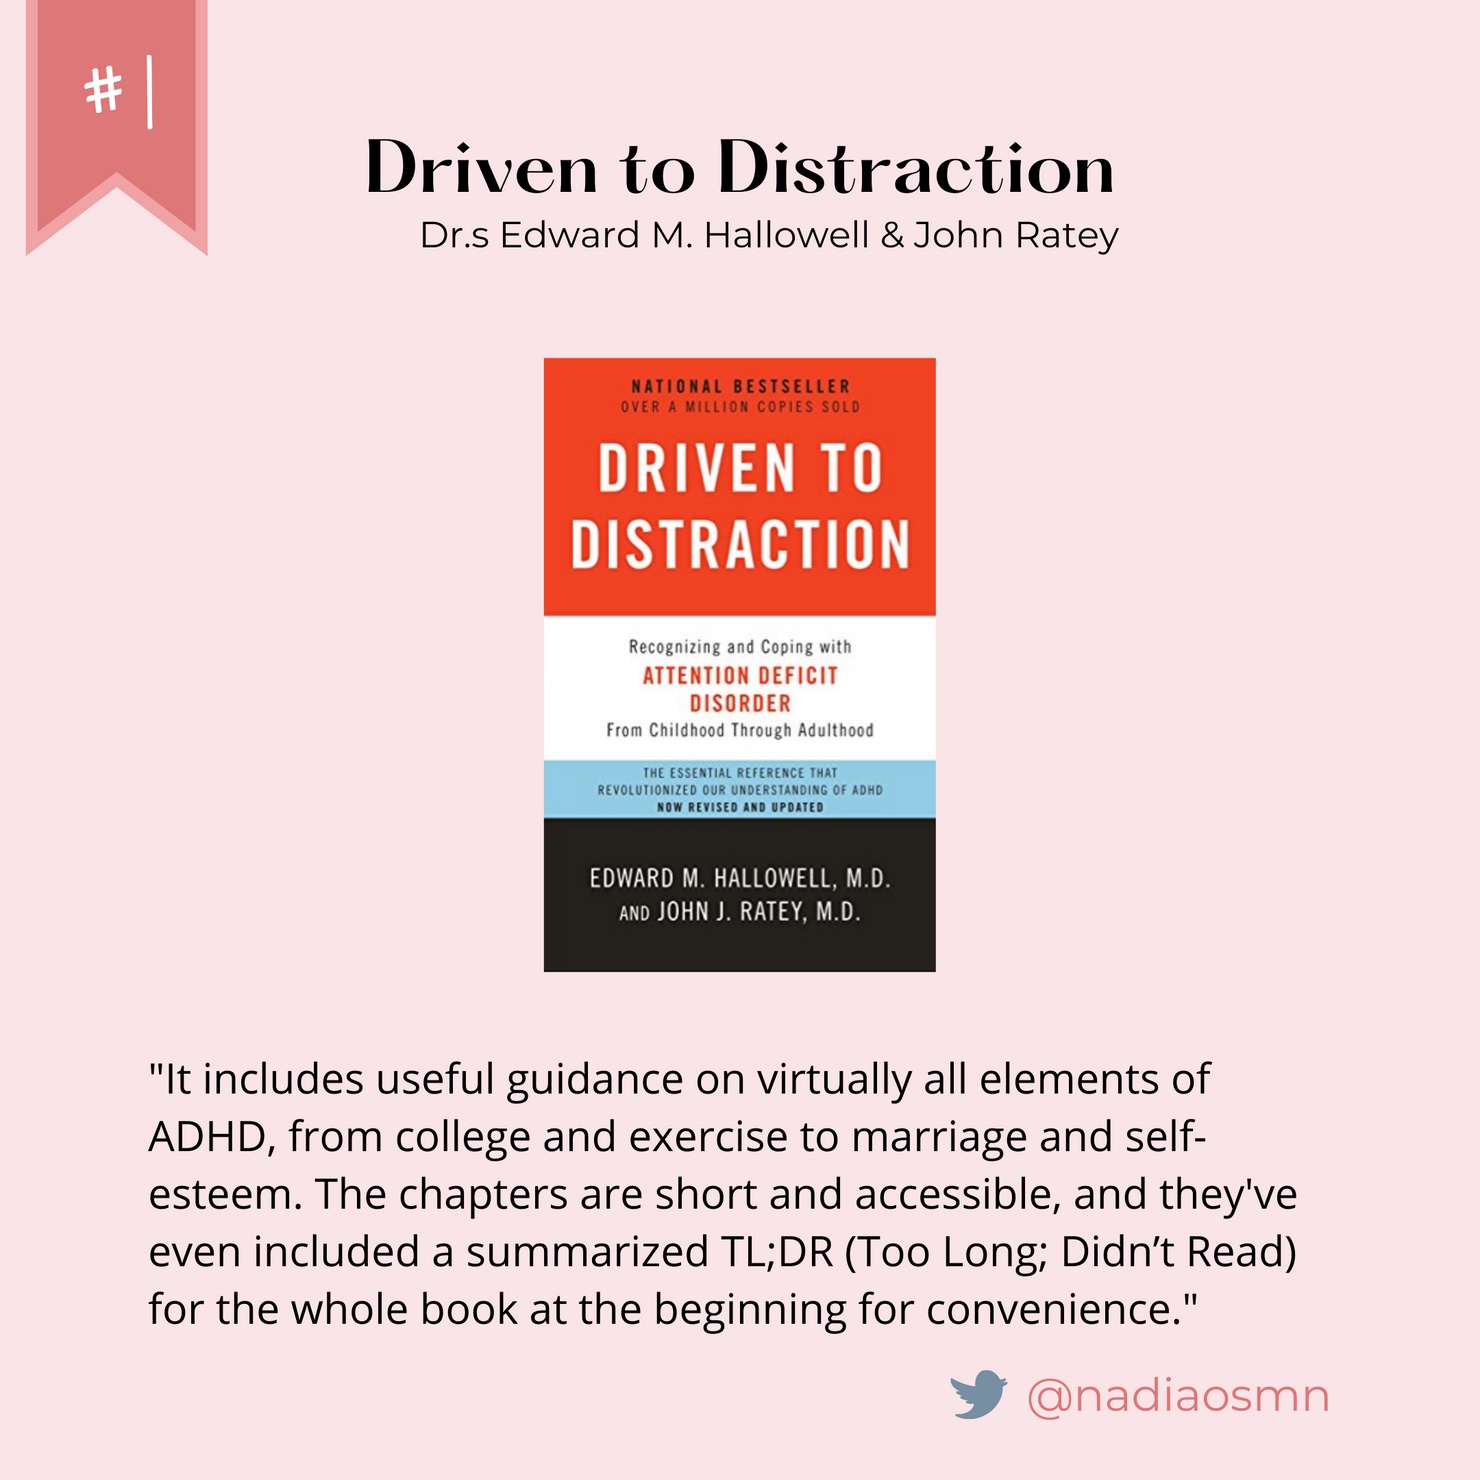 "Driven to distraction" book cover, by Dr.s Edward M. Hallowell & John Ratey. Twitter review by @nadiaosmn: "It includes useful guidance on virtually all elements of ADHD, from college and exercise to marriage and self-esteem. The chapters are short and accessible, and they've even included a summarized TL;DR (Too long; didn't read) for the whole book at the beginning for convenience."